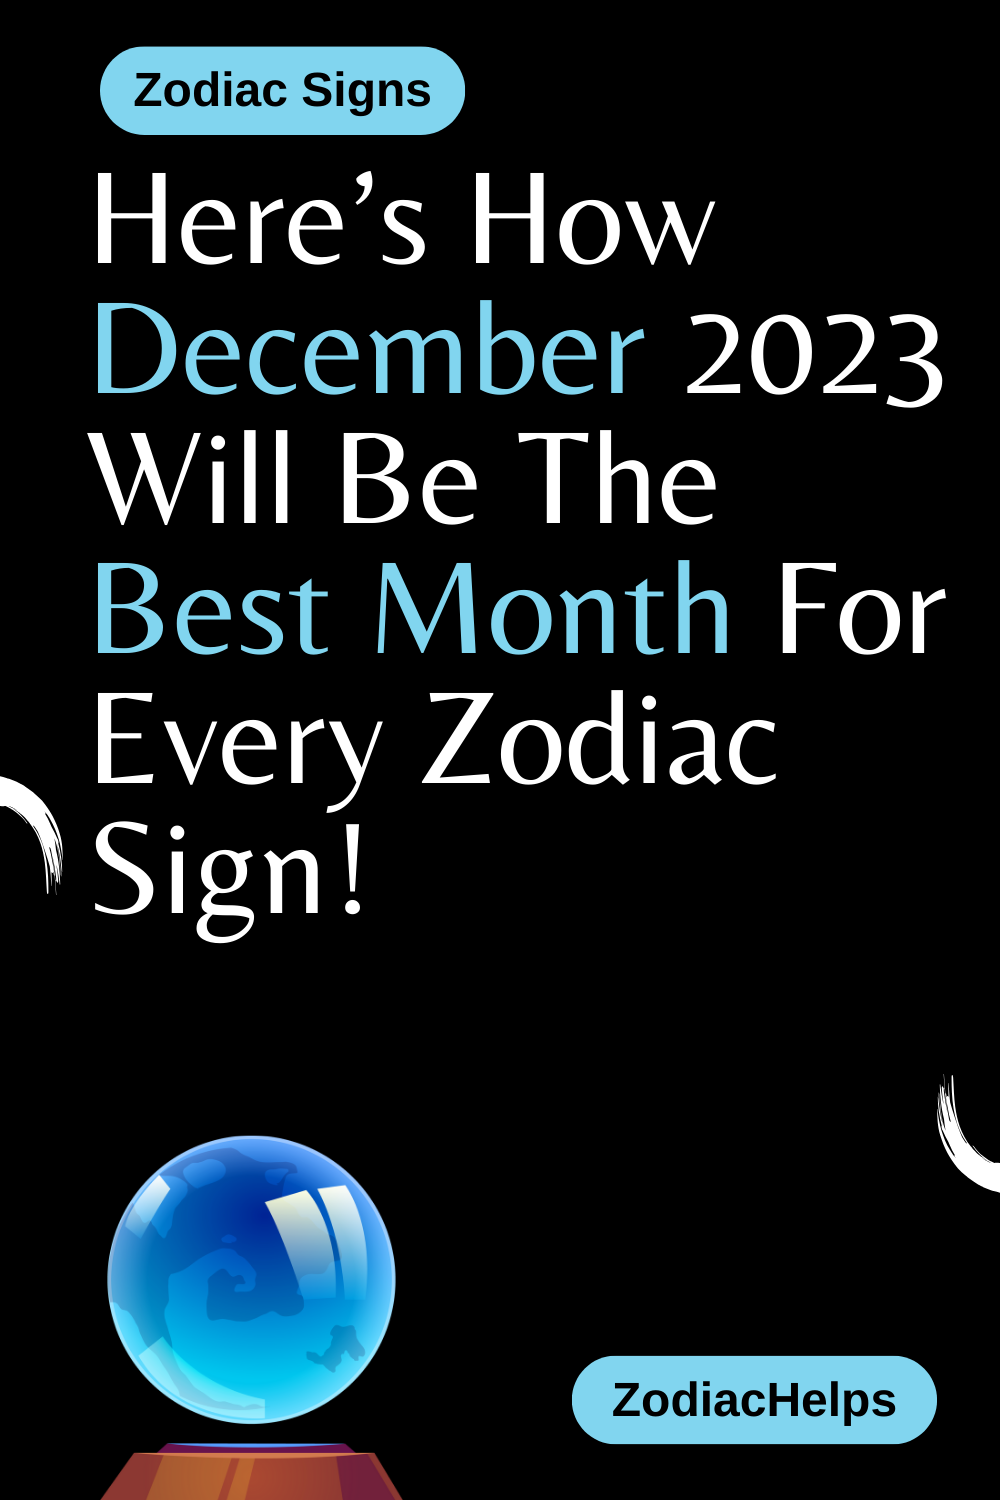 Heres How December 2023 Will Be The Best Month For Every Zodiac Sign 